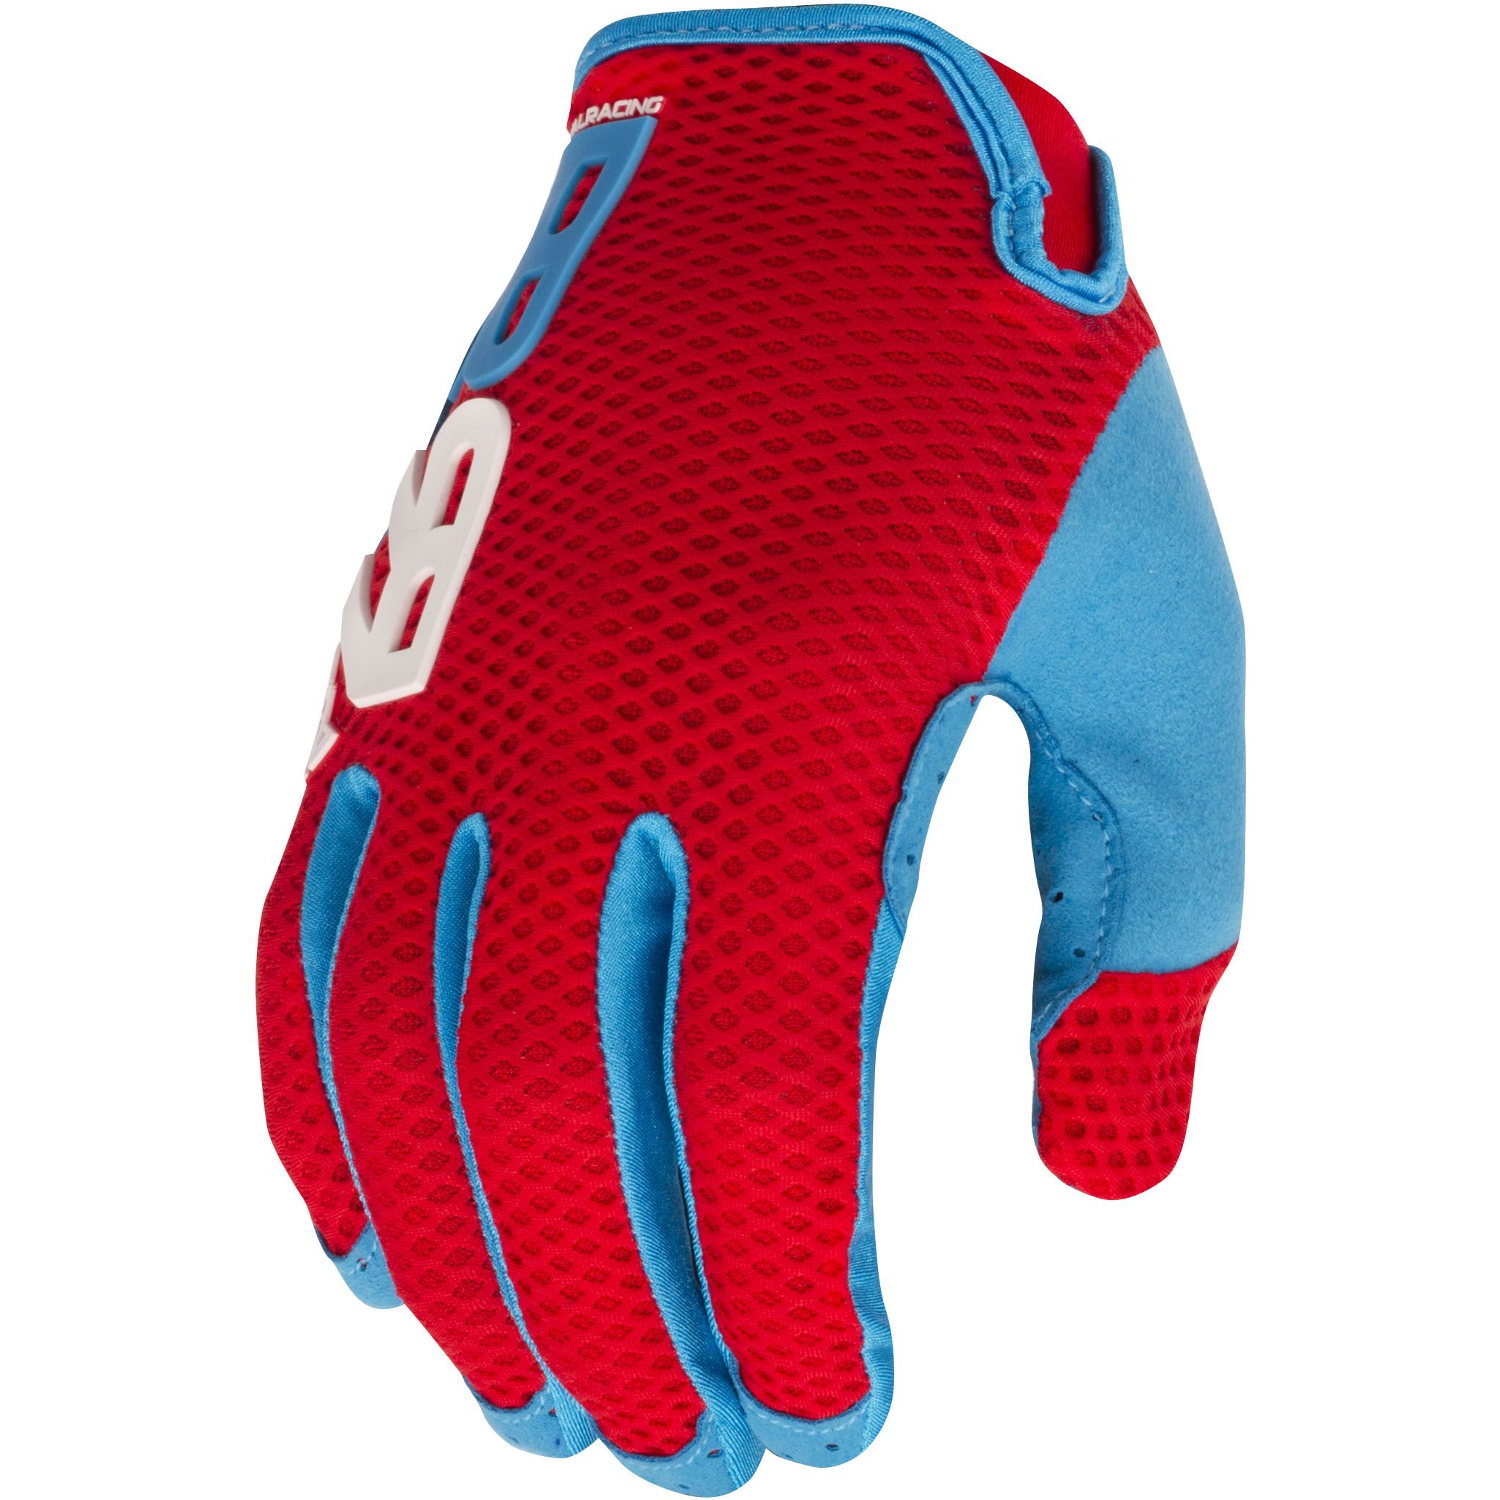 Royal Racing Gloves Quantum Red/Sky Blue